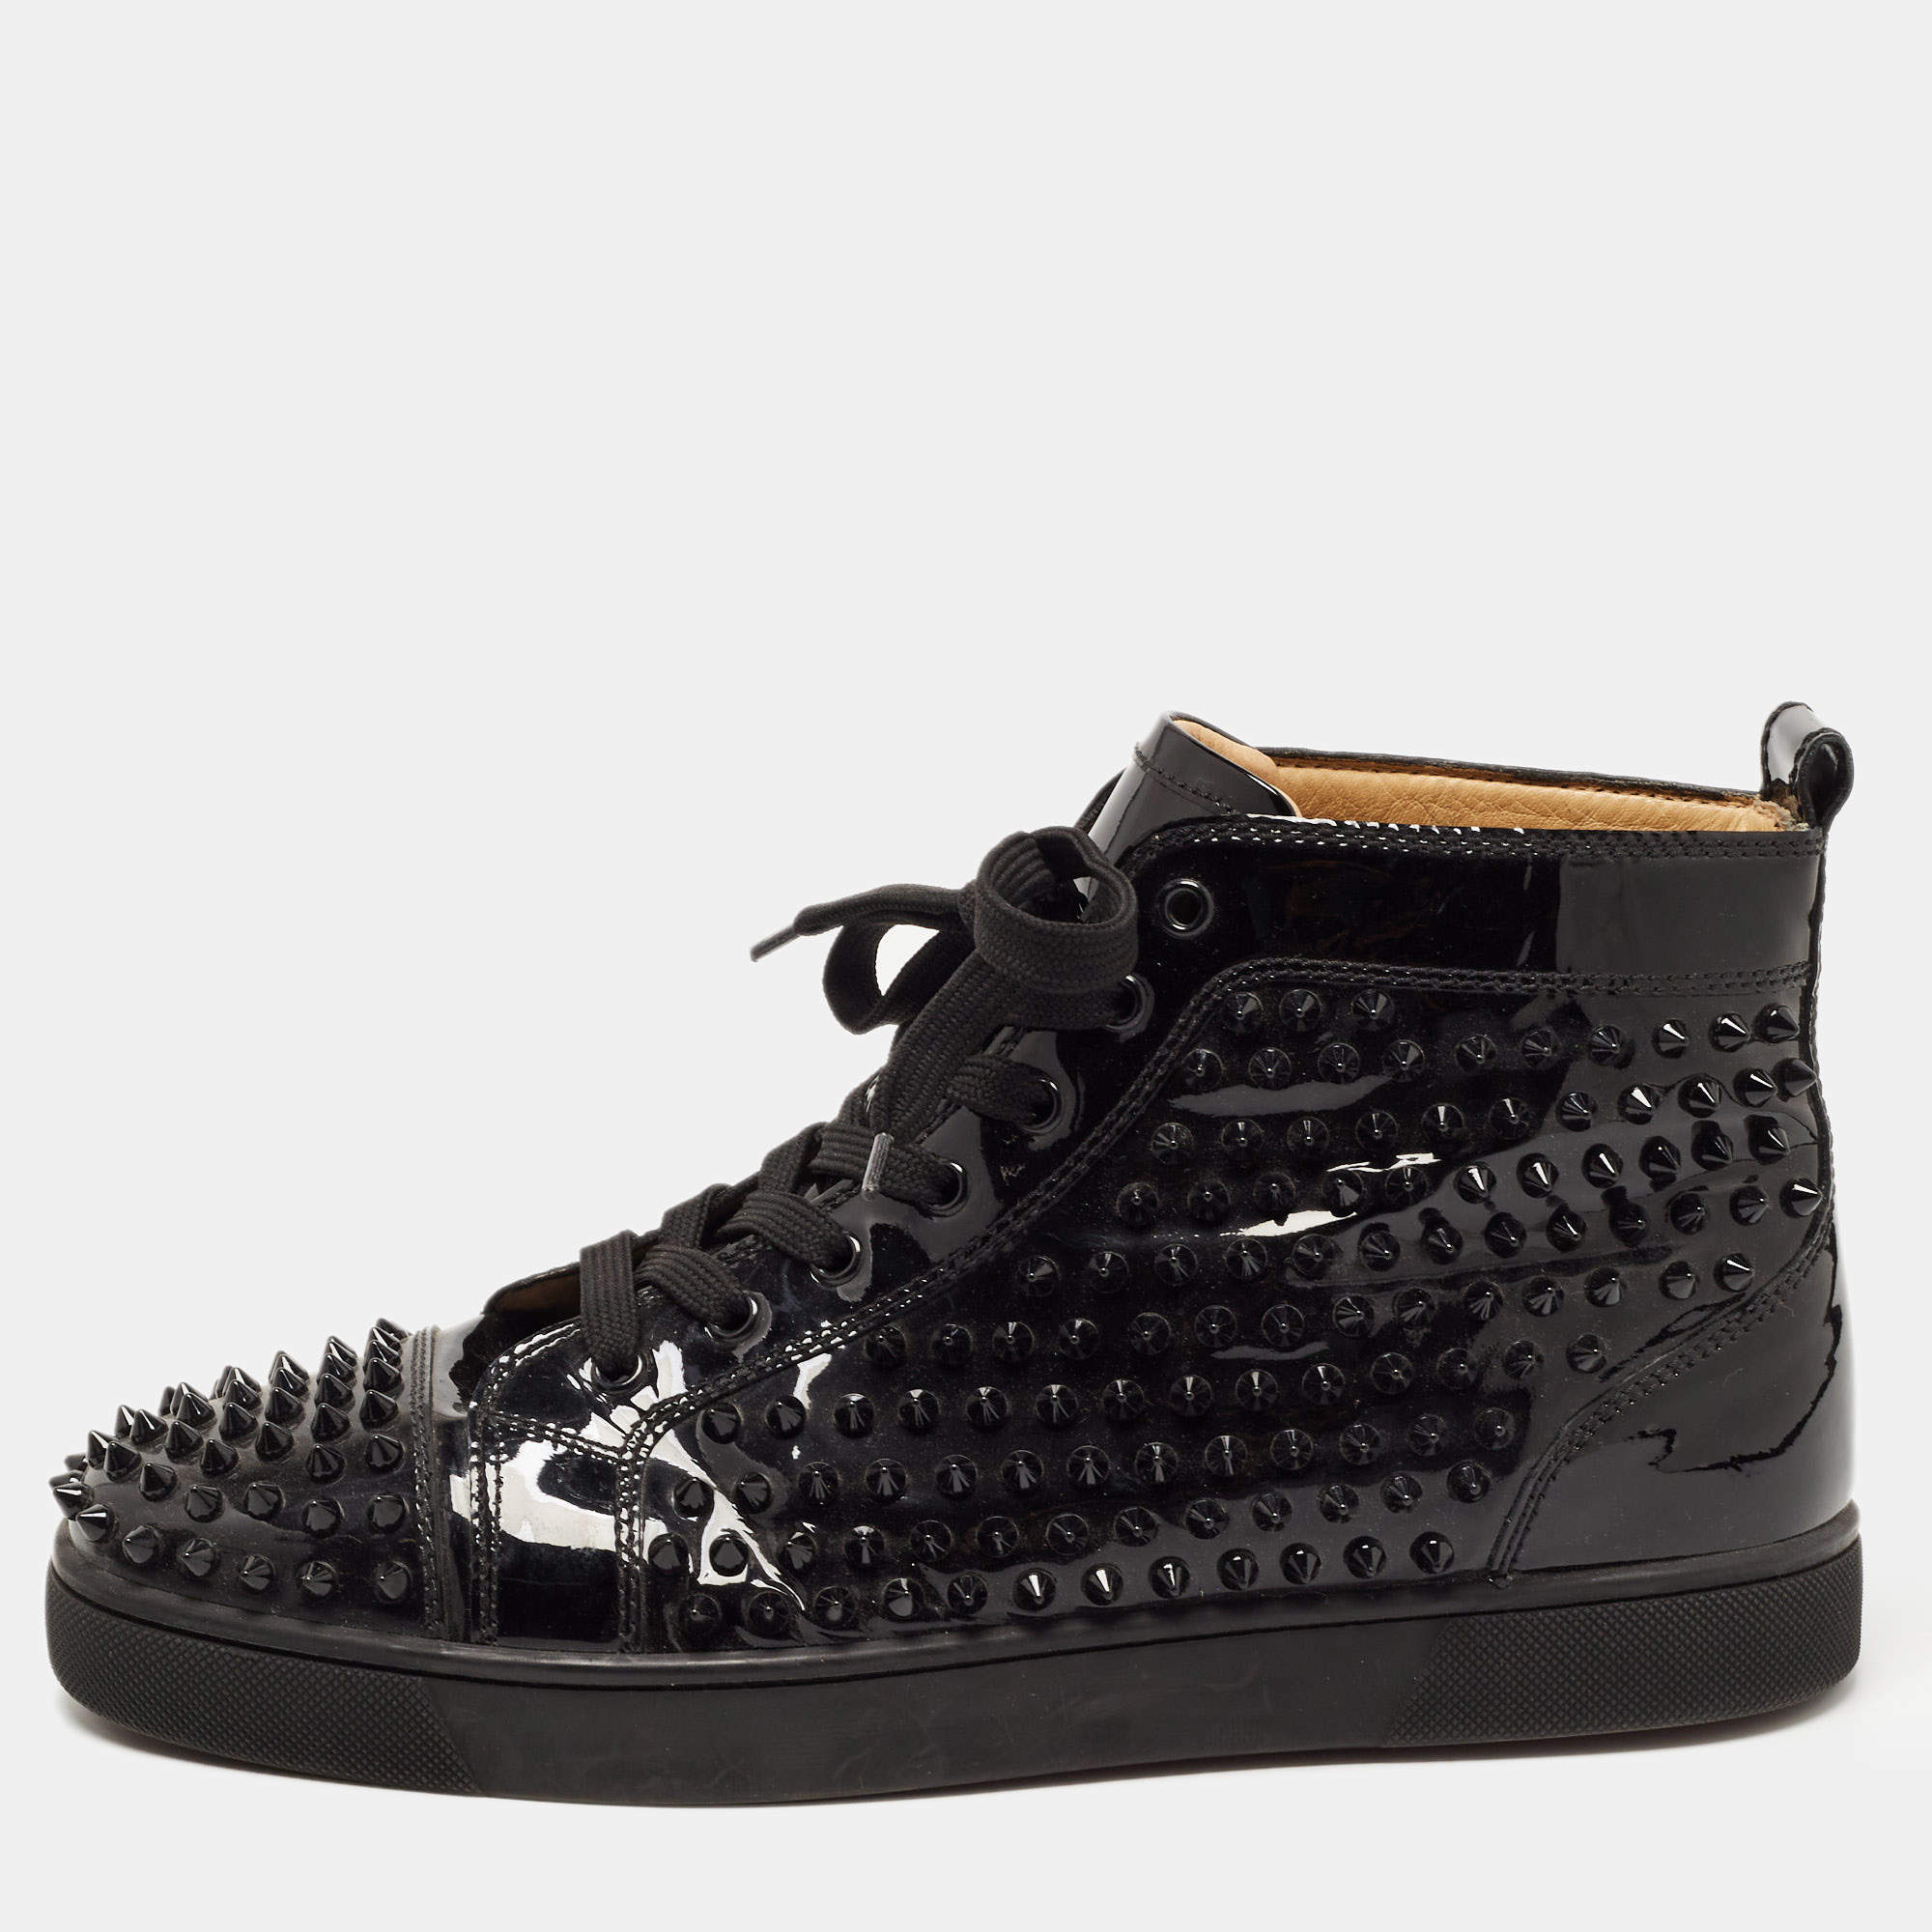 damp skole repertoire Christian Louboutin Black Patent Leather Louis Spikes High Top Sneakers  Size 43.5 Christian Louboutin | TLC